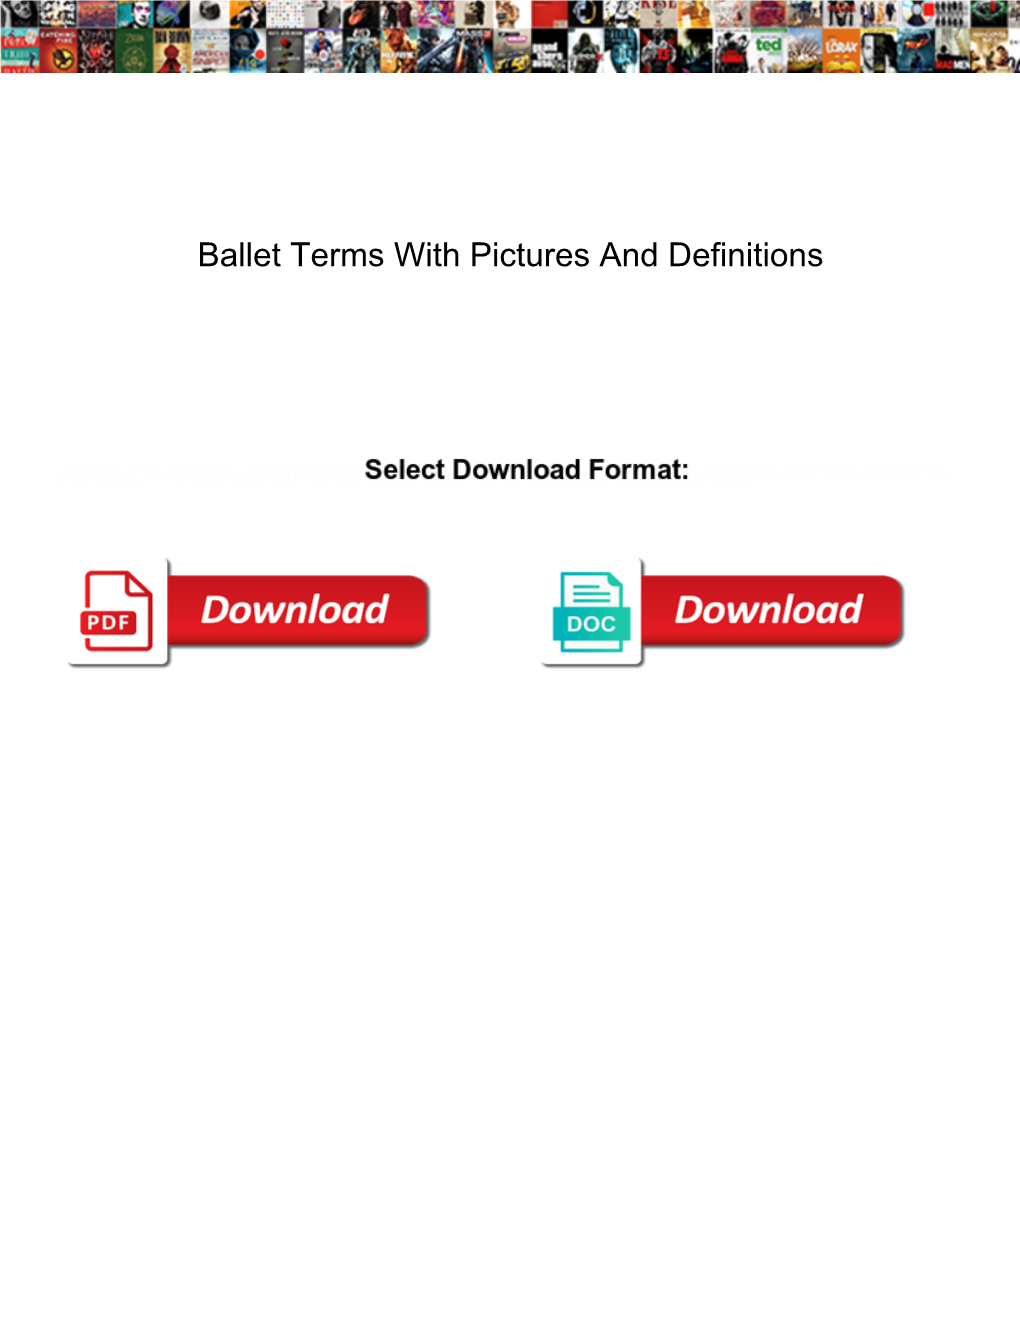 Ballet Terms with Pictures and Definitions